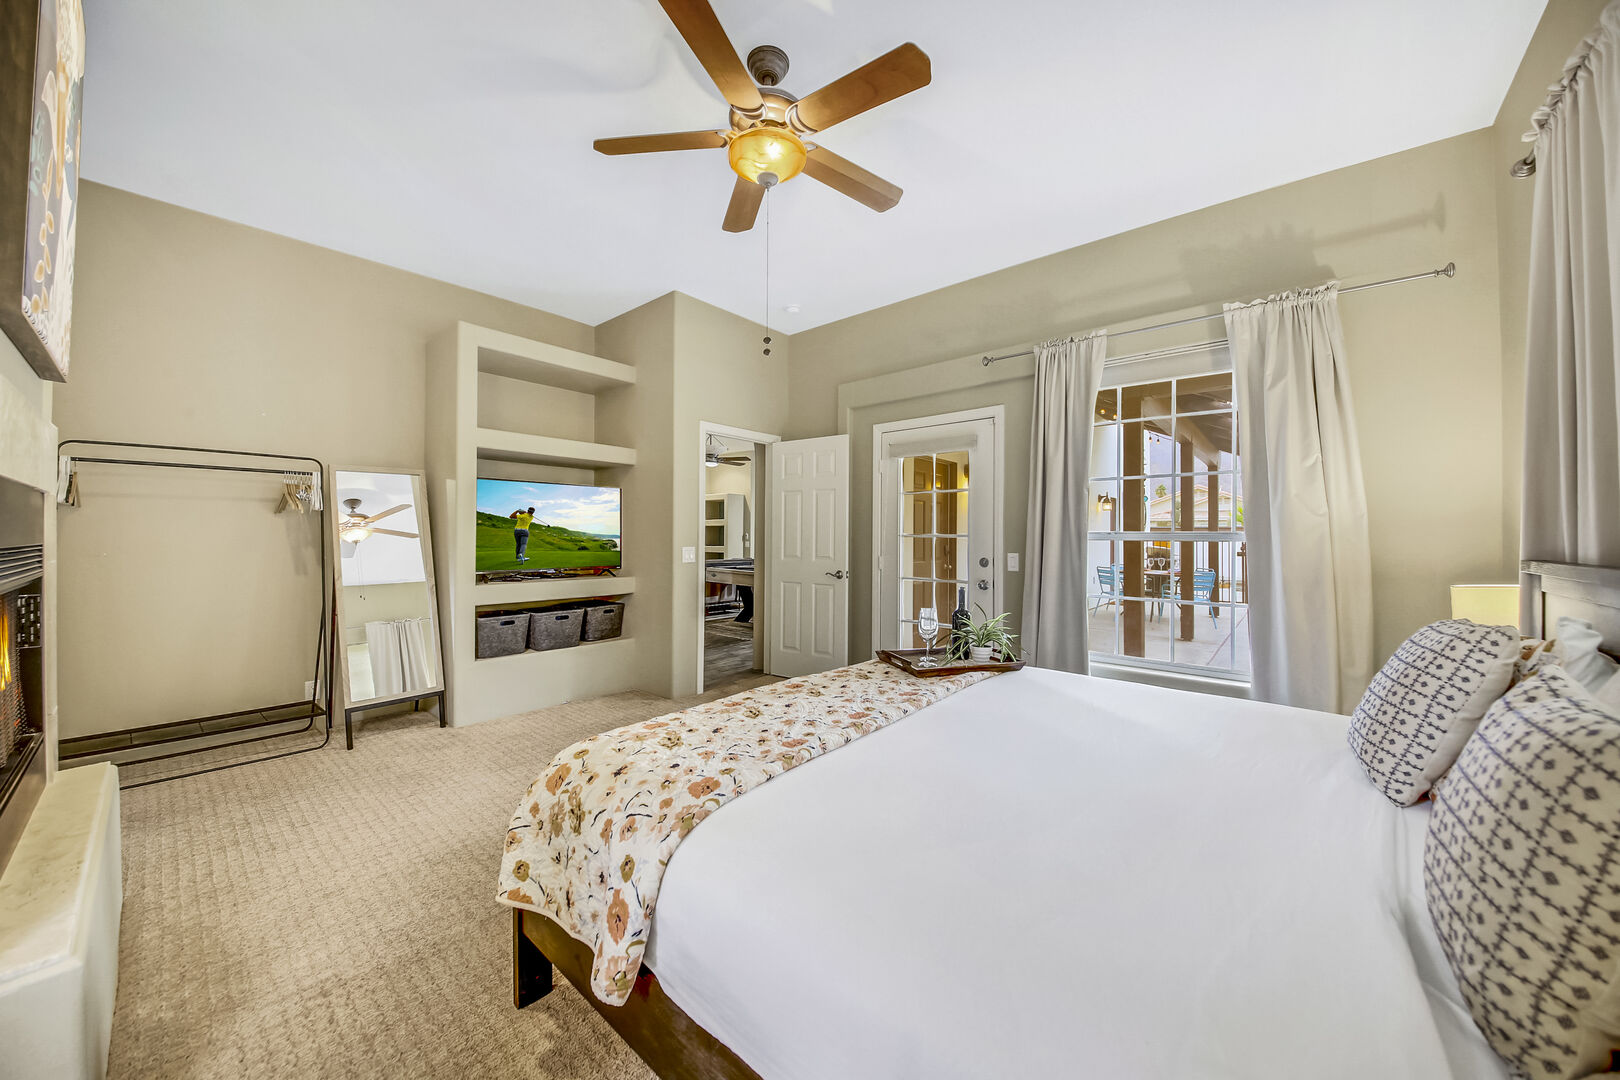 Master Suite 1 salso includes a witch-controlled ceiling fan, and walk-in closet and a natural gas fireplace.